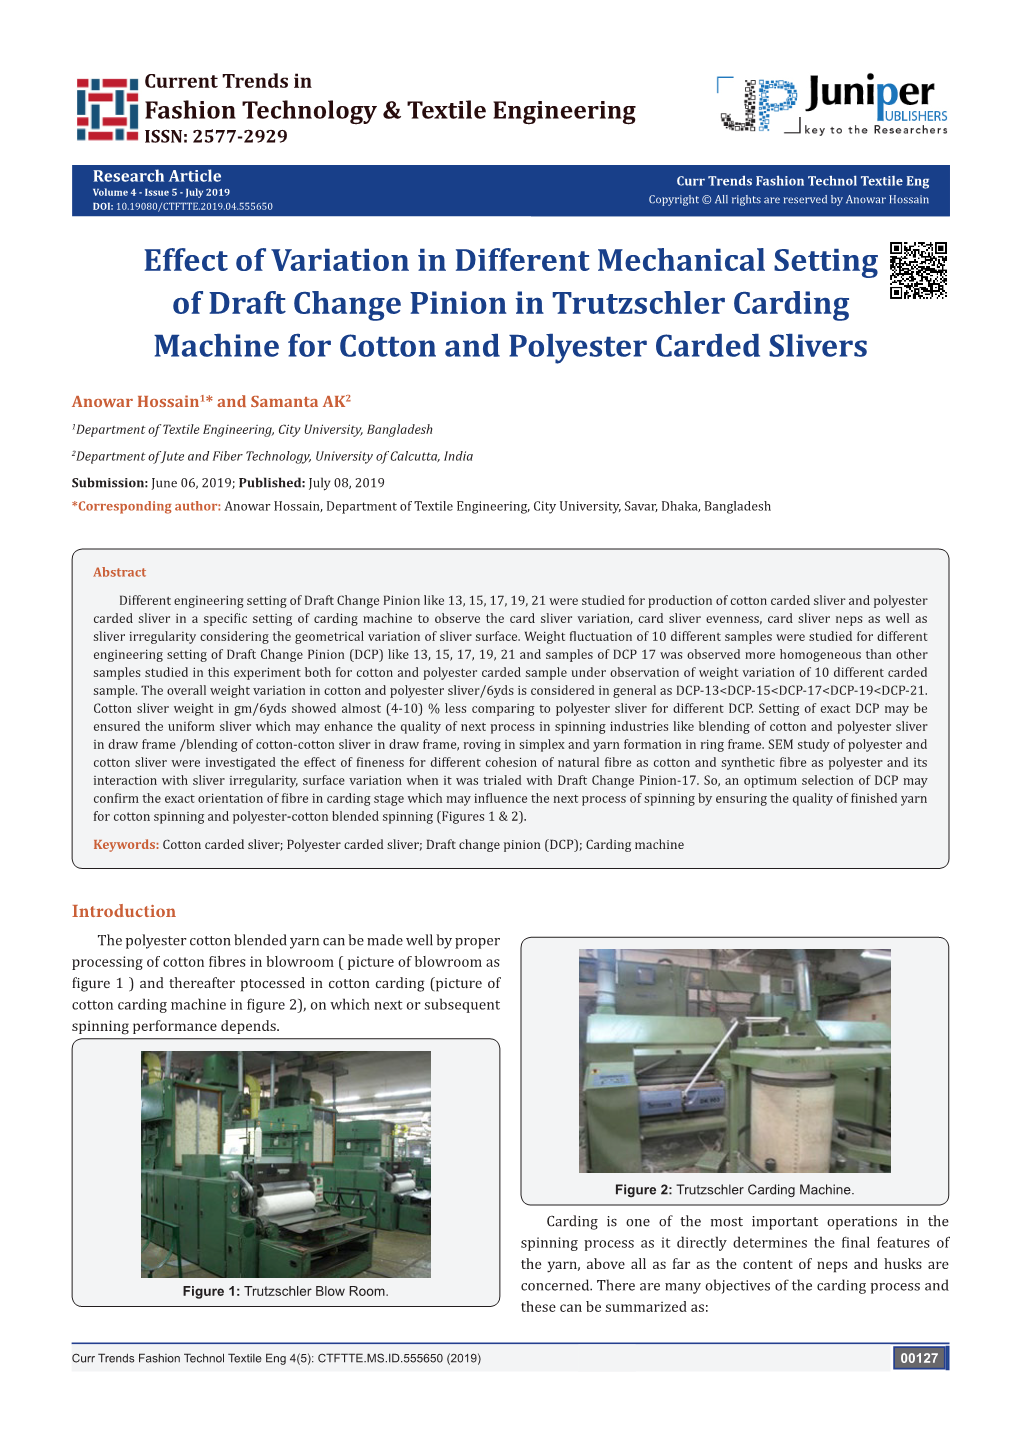 Effect of Variation in Different Mechanical Setting of Draft Change Pinion in Trutzschler Carding Machine for Cotton and Polyester Carded Slivers